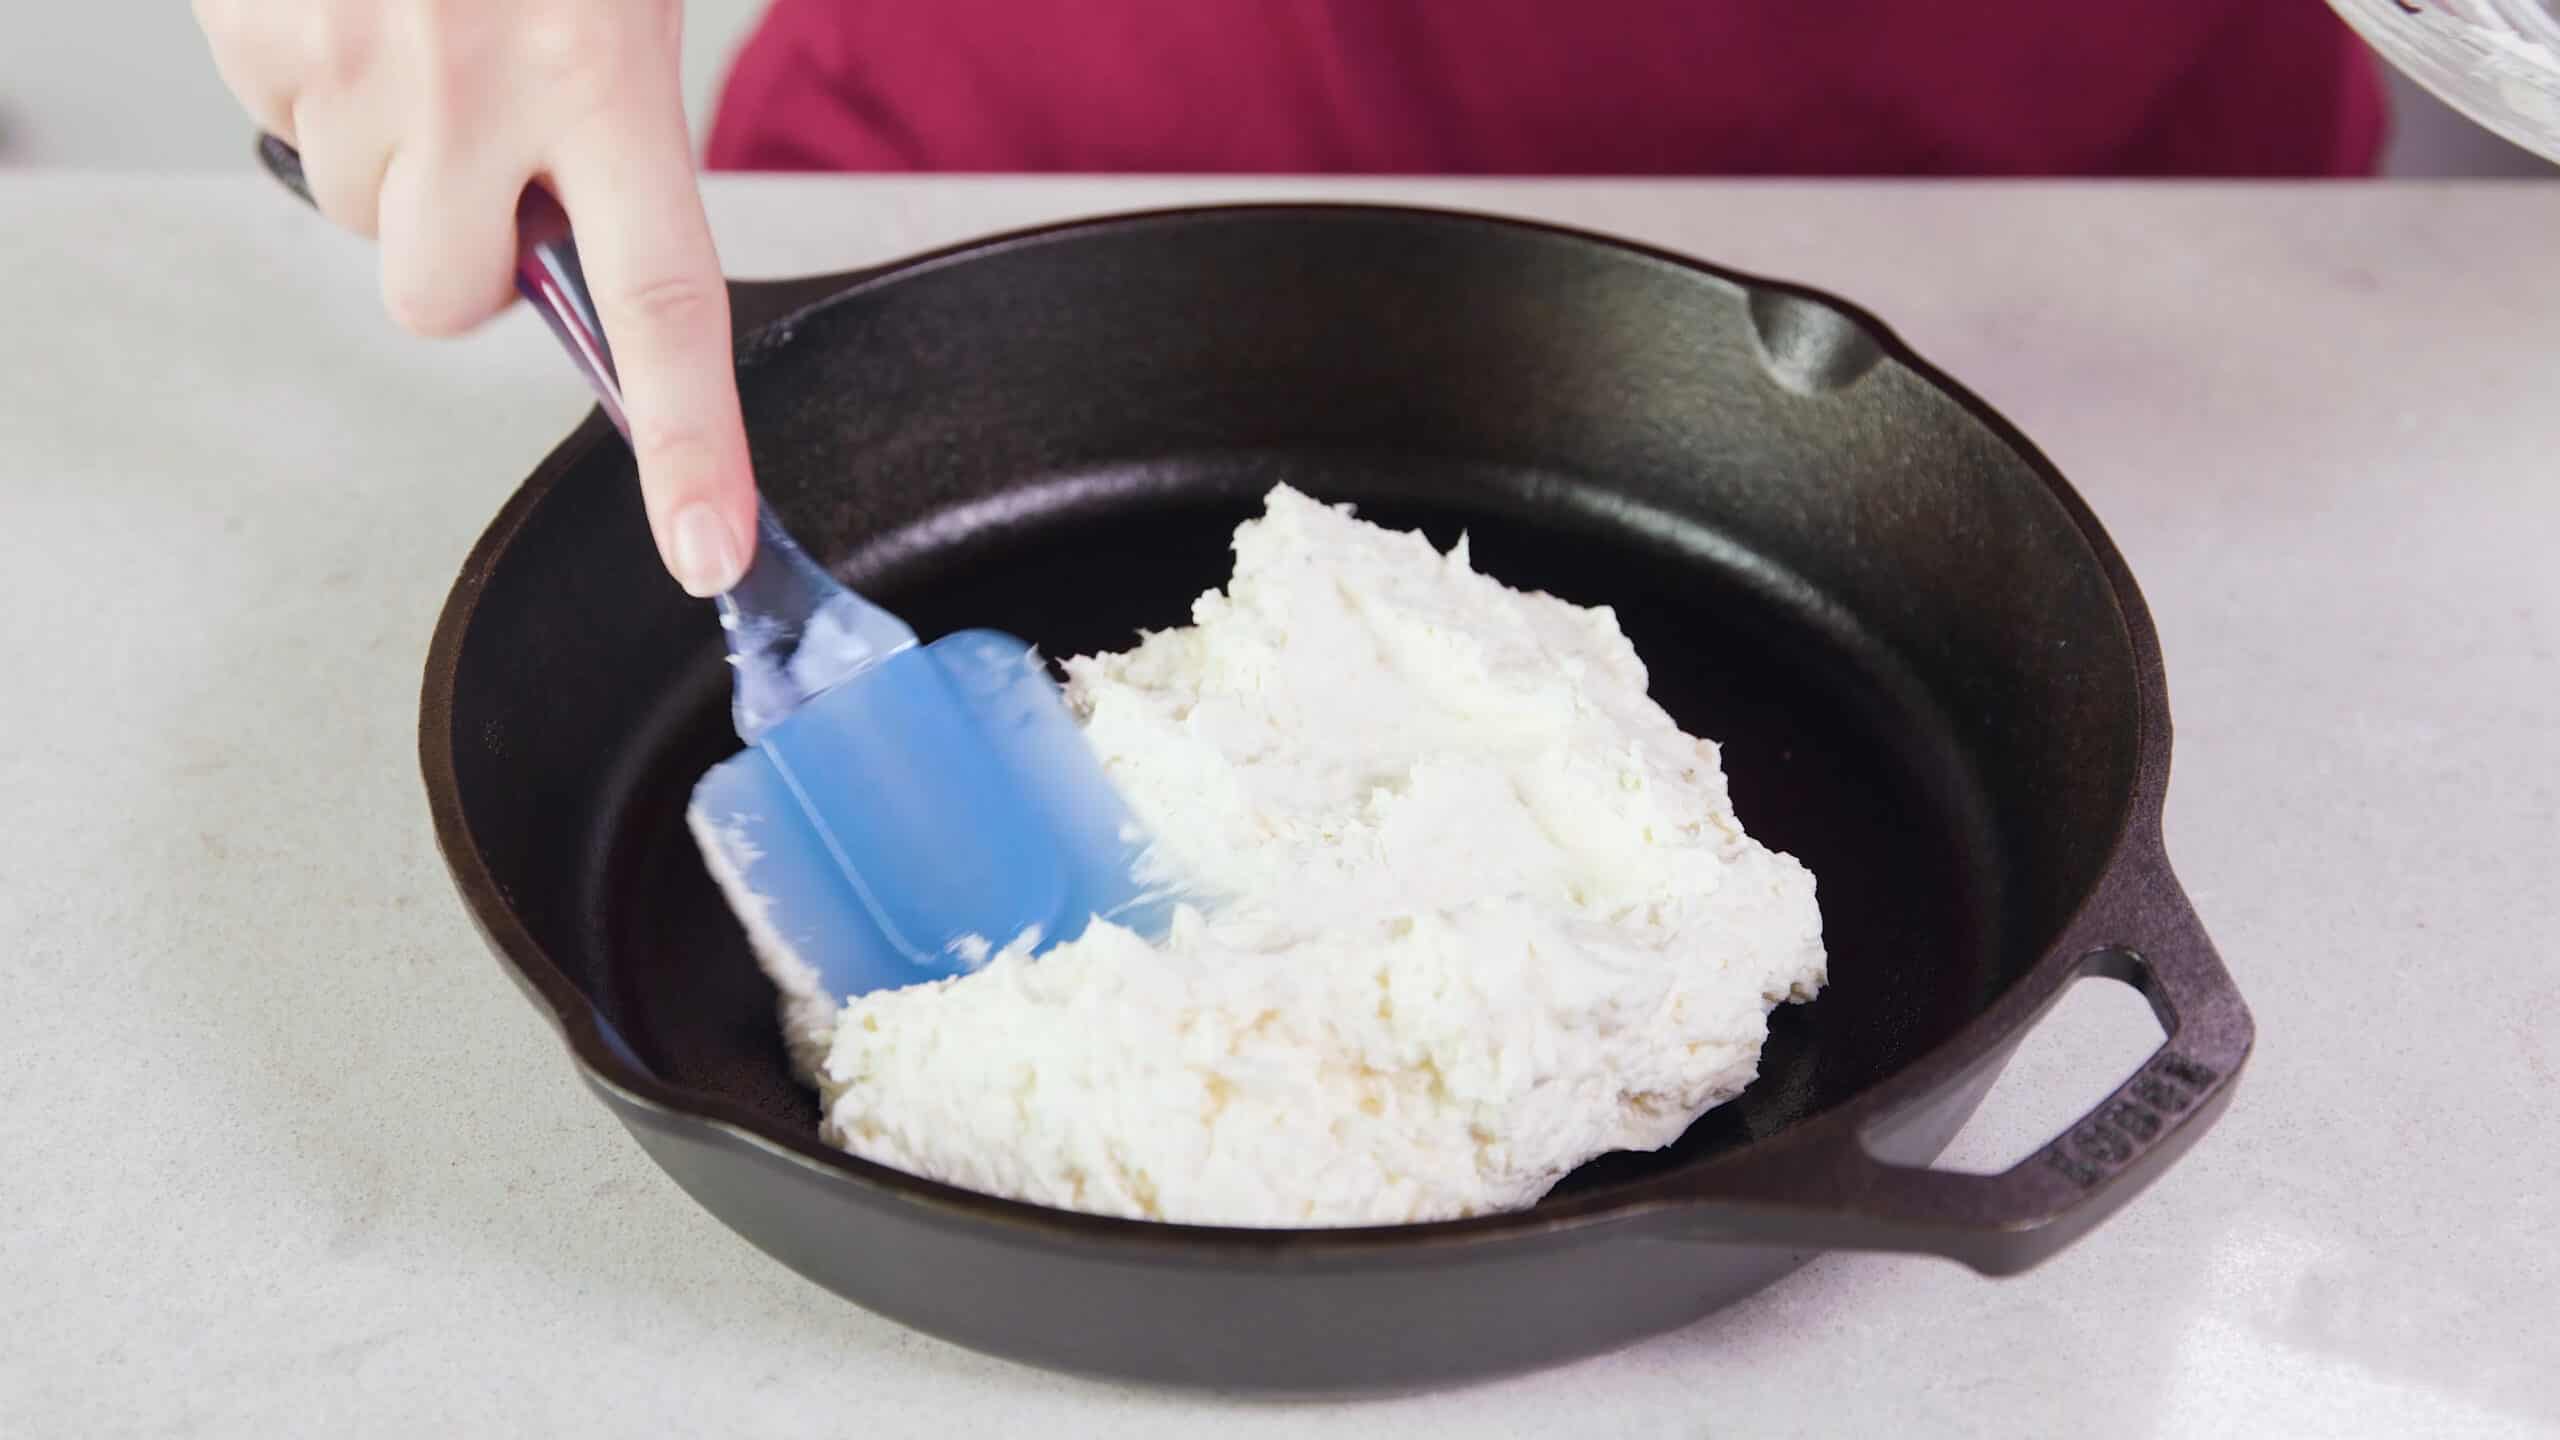 Angled view of cast iron skillet filled with cream cheese mixture and spread along the bottom of the pan by a plastic spatula all on a marble countertop.